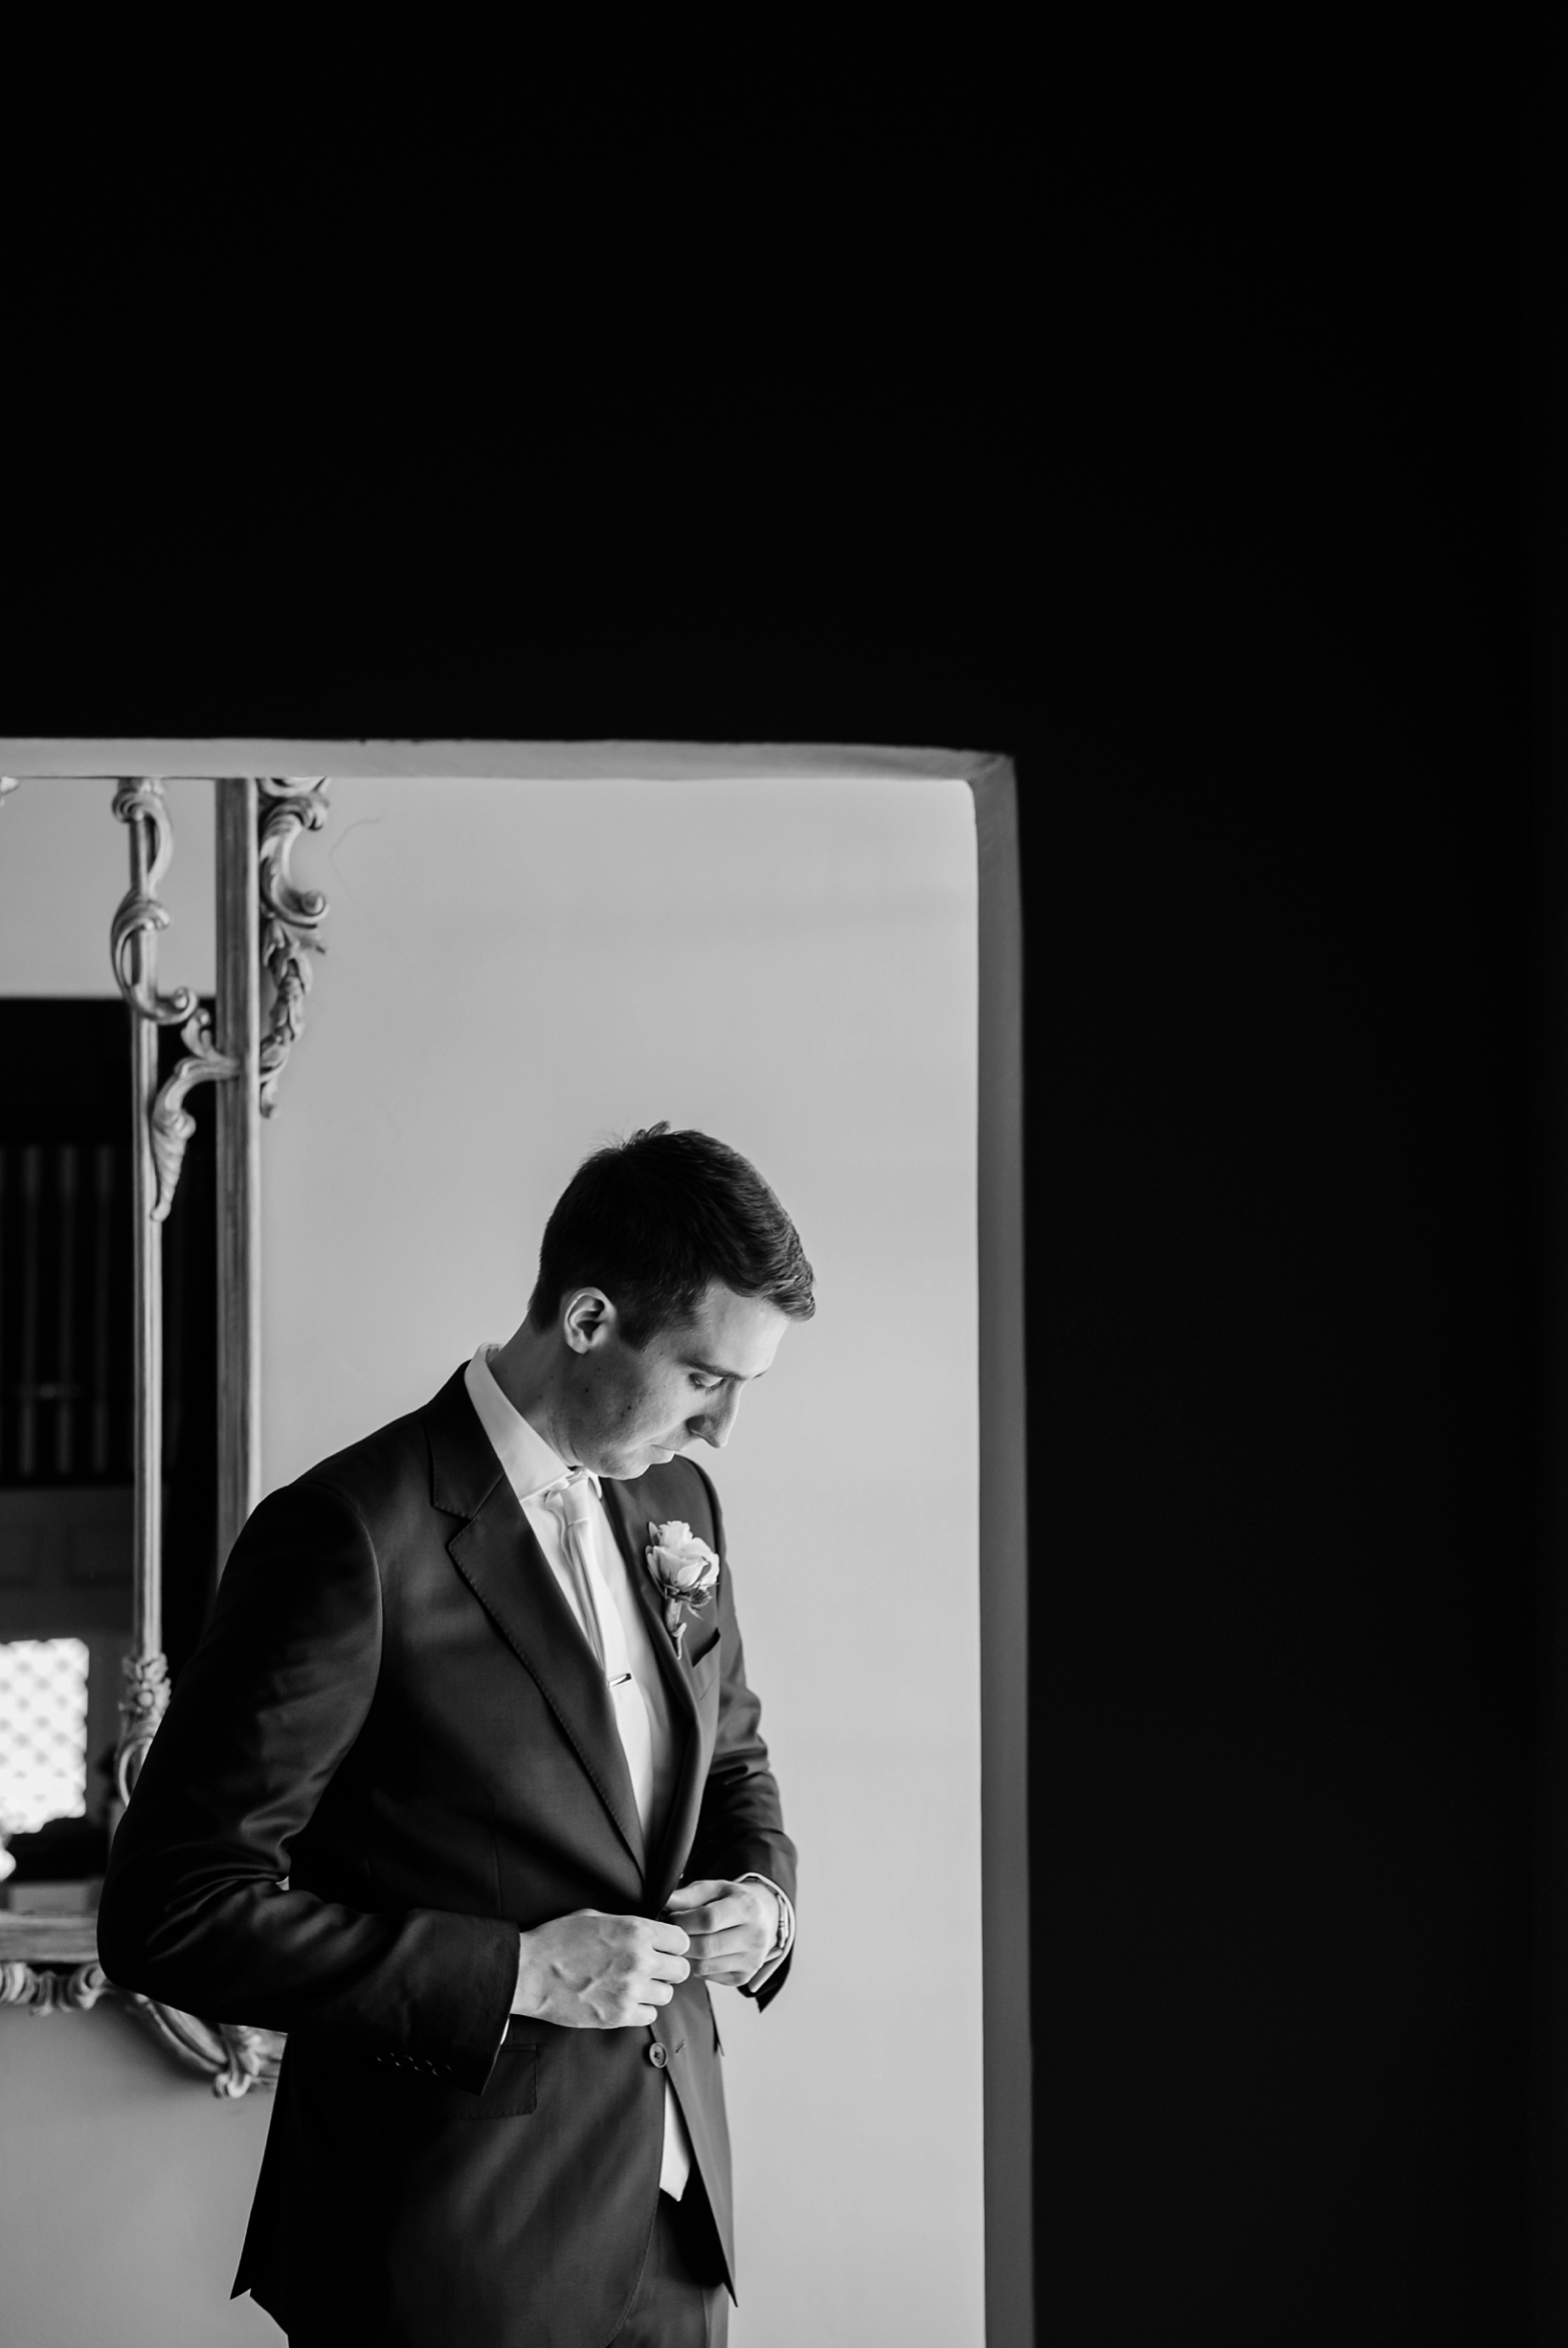 The groom in an asymmetrical framing pose adjusting his suit jacket